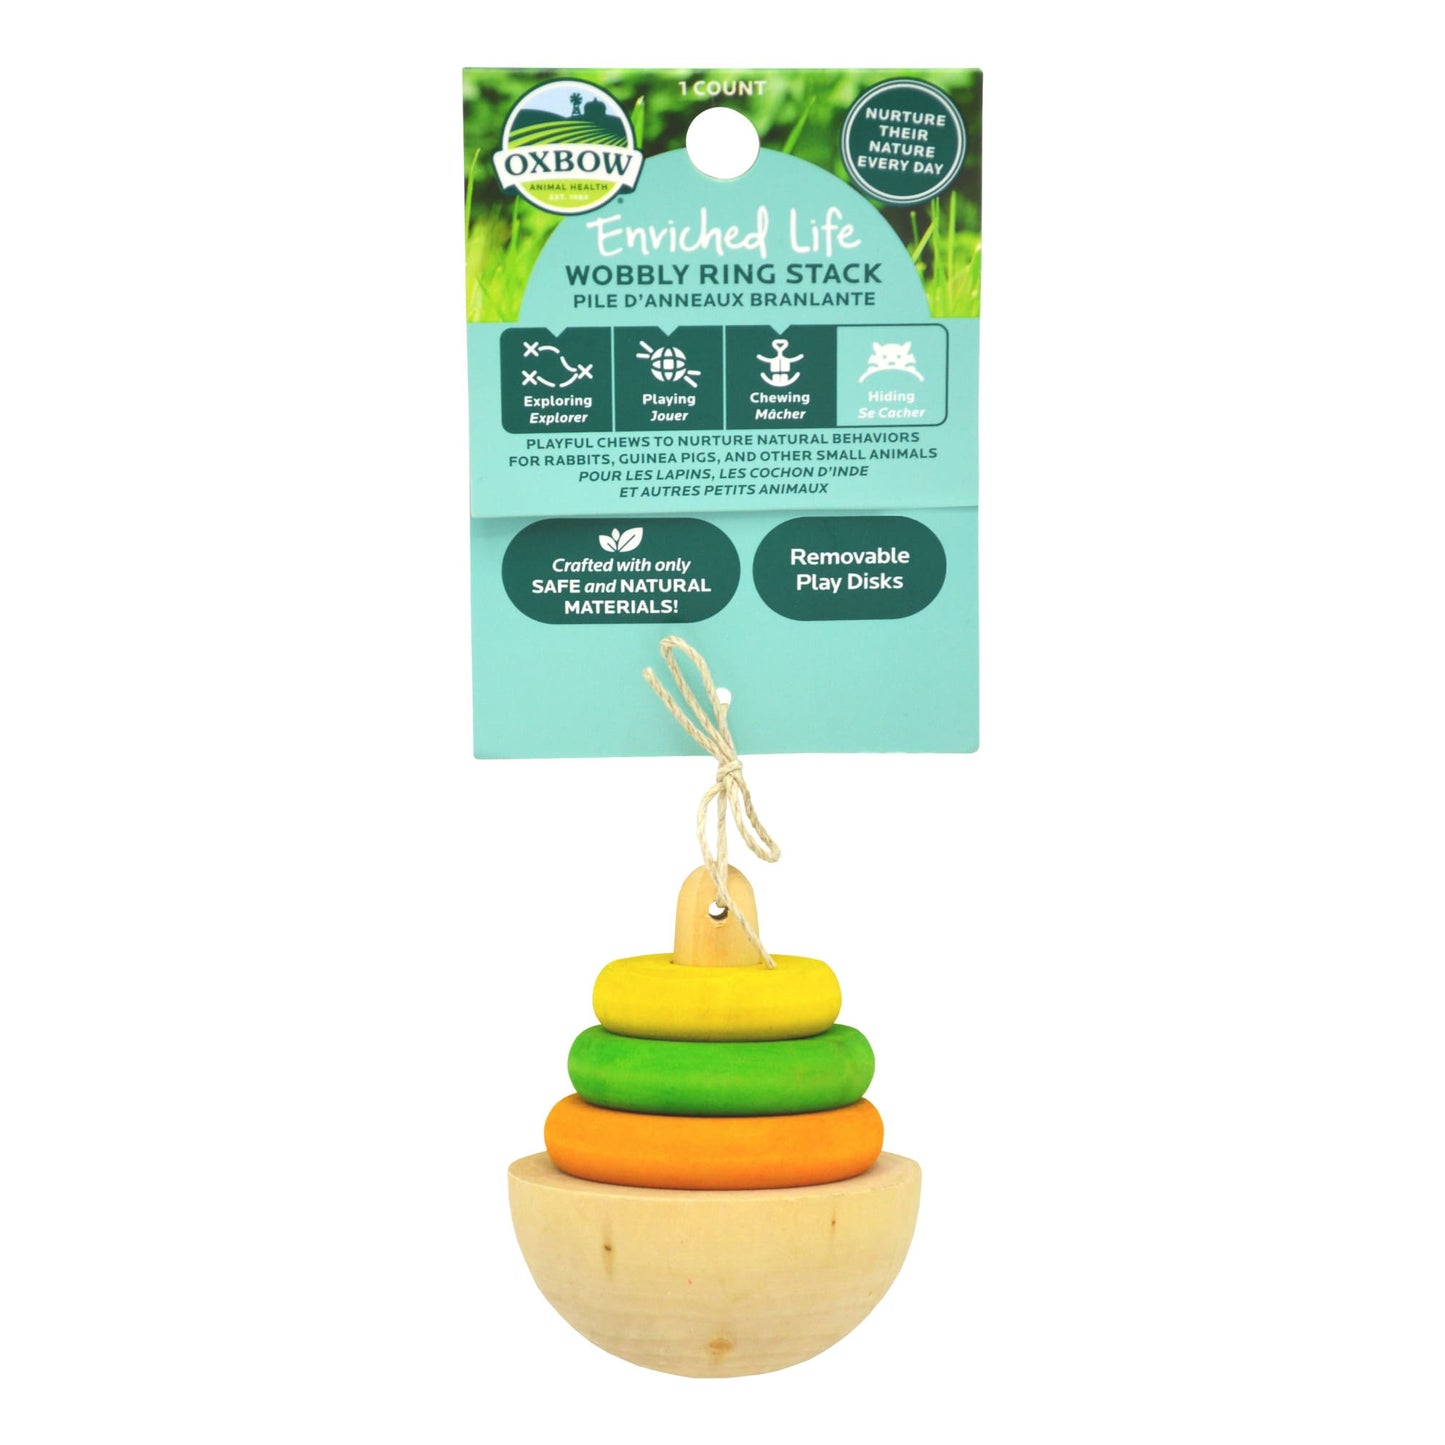 Oxbow Enriched Life Wobbly Ring Stack All-Natural Toy For Small Animals